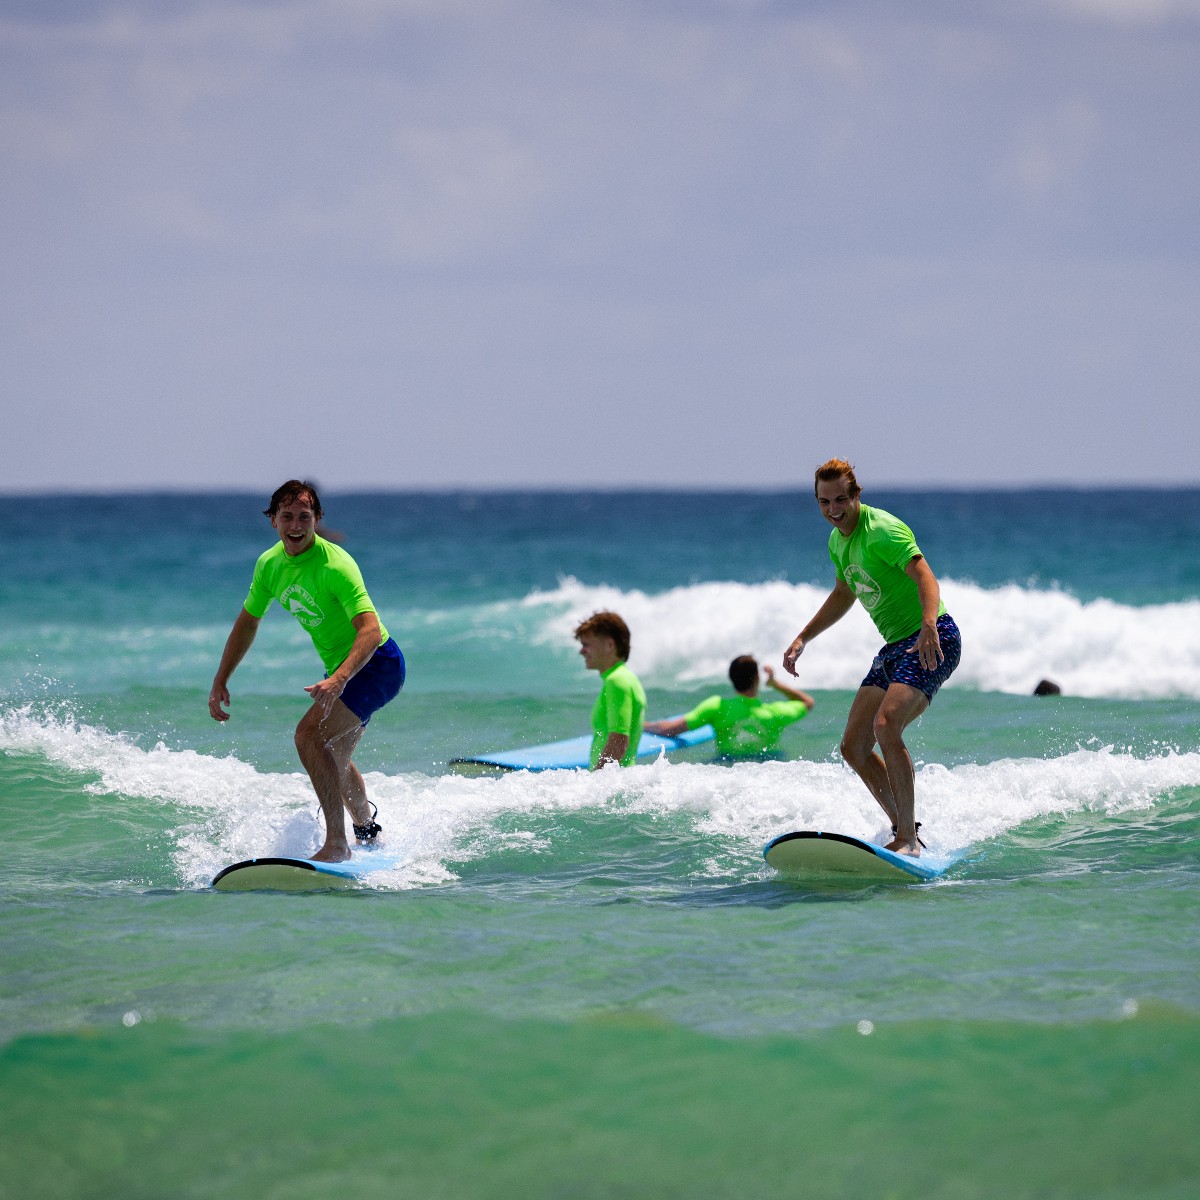 When two American students stumbled across a surfing class offered at Bond's Gold Coast campus, they knew they had to try it out during their study abroad trip and now, they've fallen in love with the sport! 🏄🏼‍♂️ Read about the experience here: brnw.ch/21wIBms